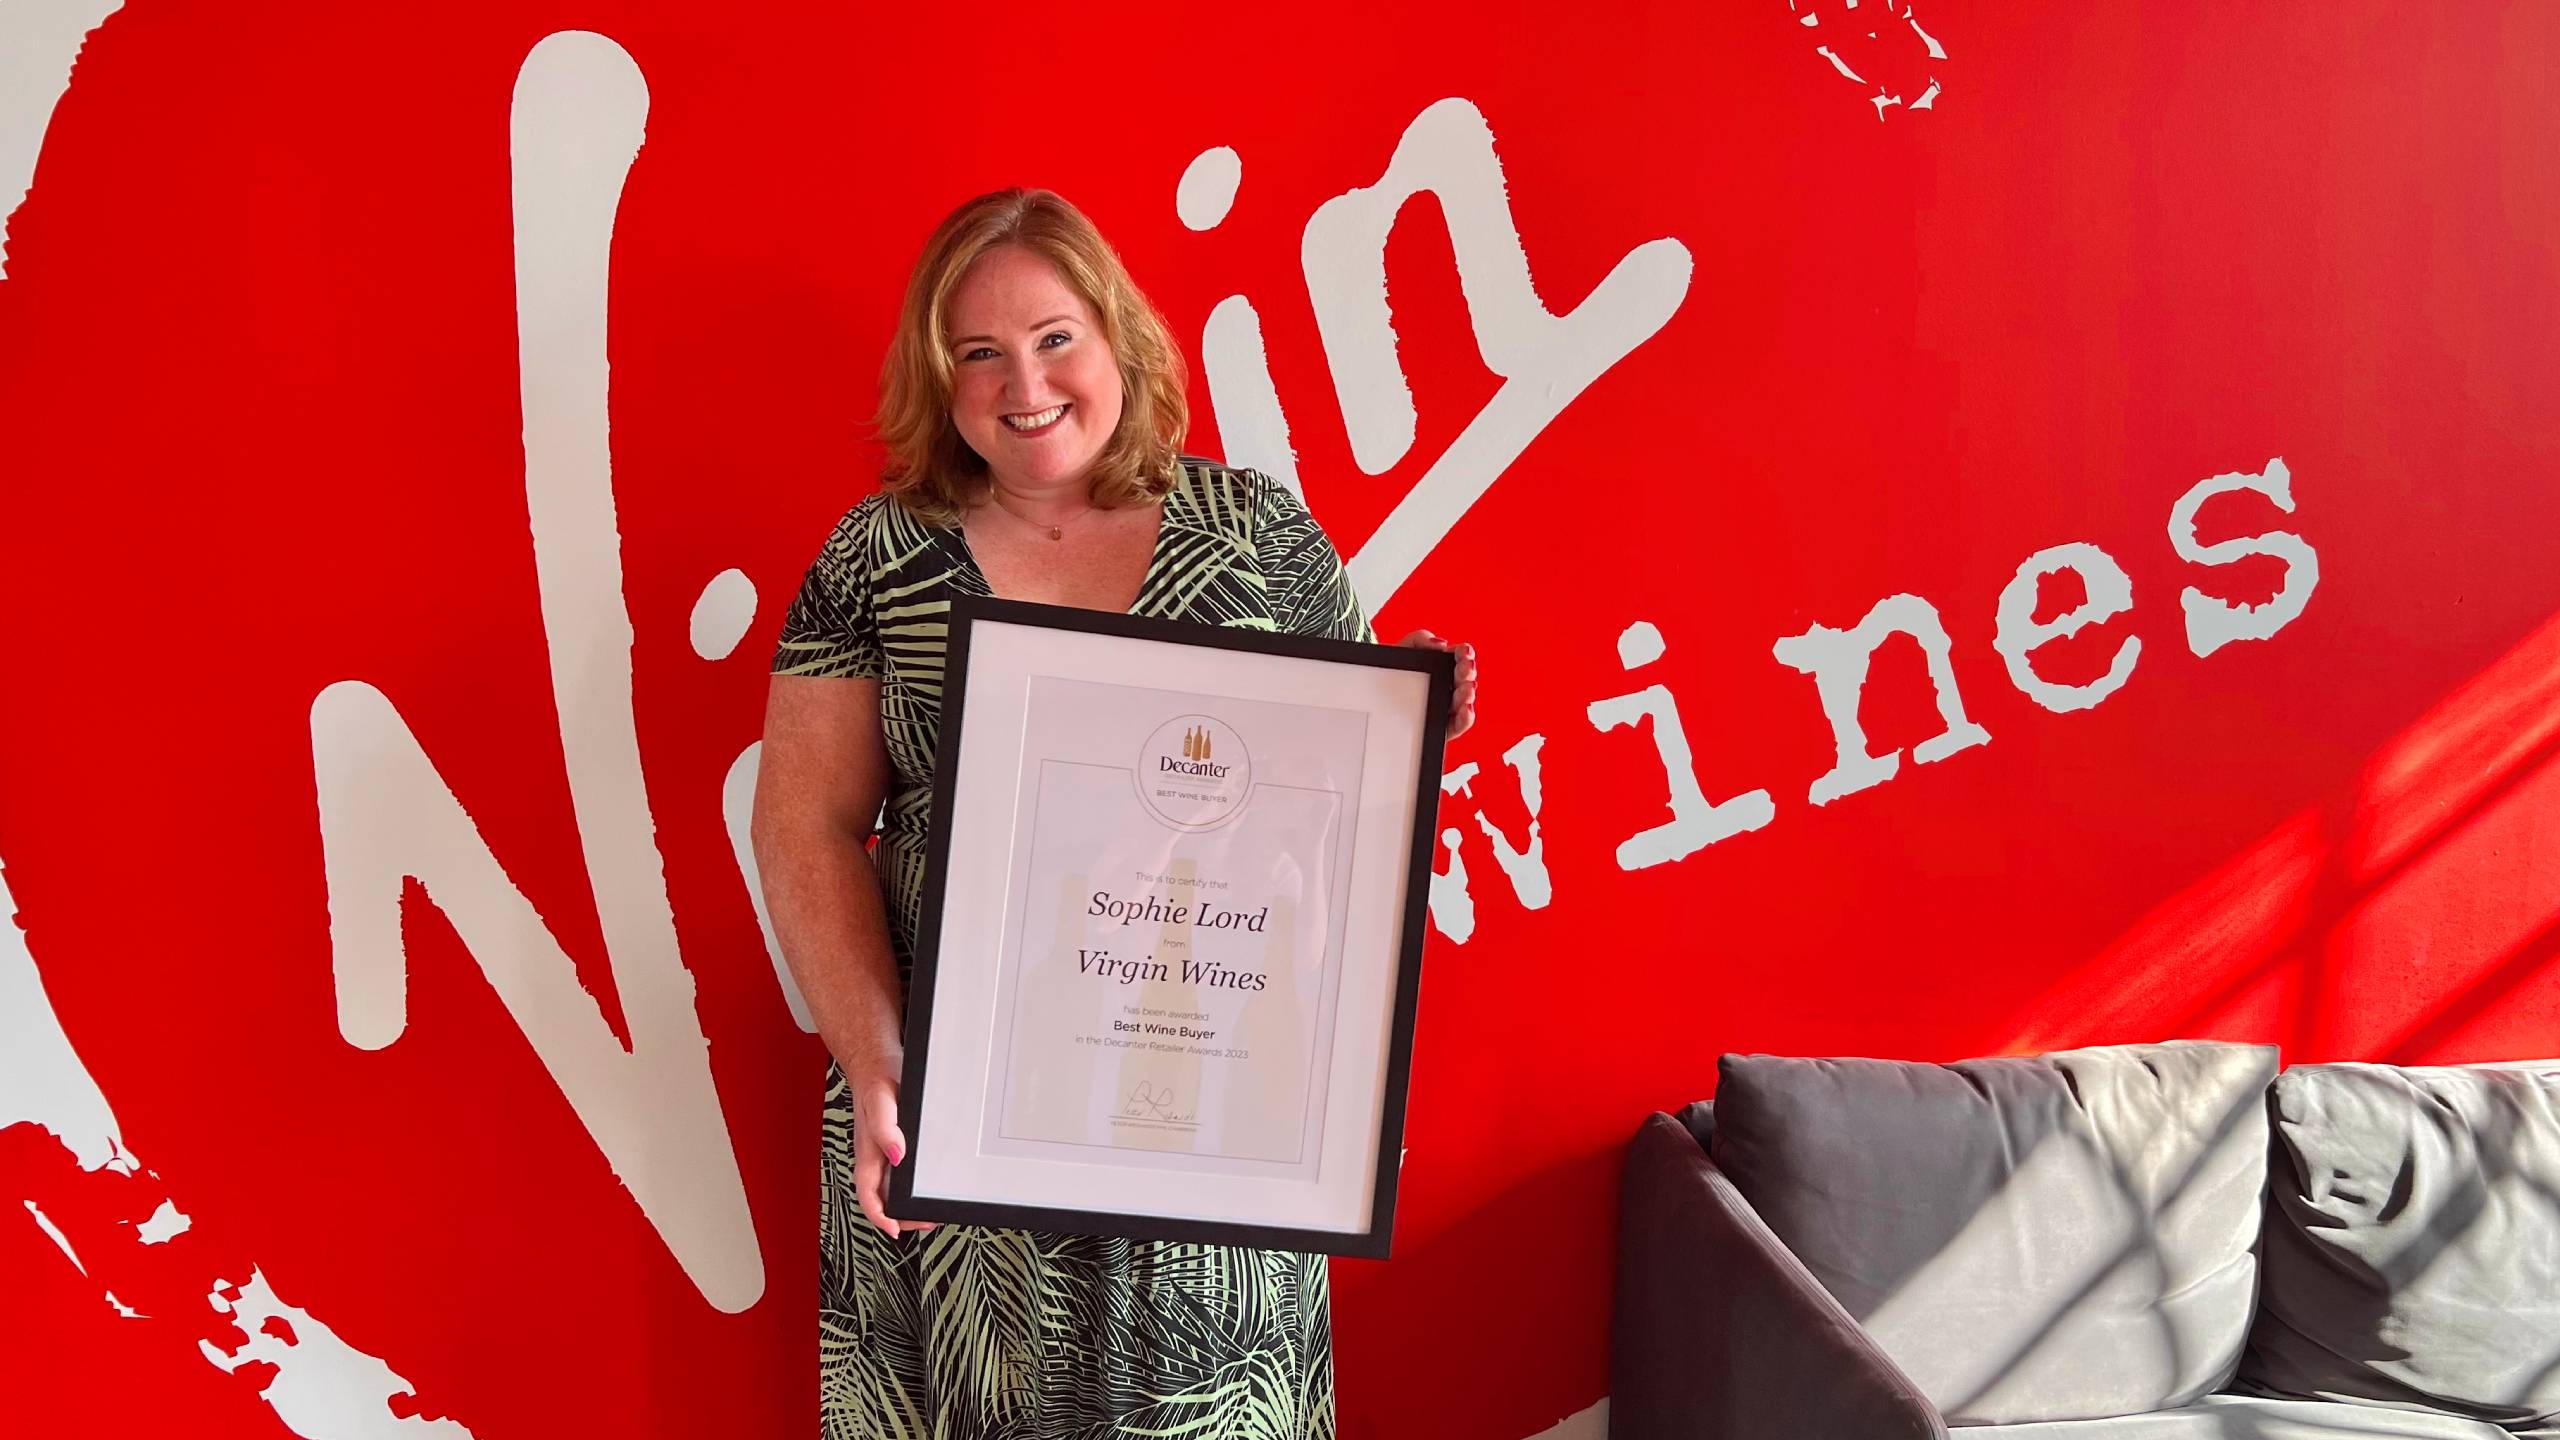 Head of Buying at Virgin Wines, Sophie Lord, holding up her Best Wine Buyer certificate as a Decanter award winner